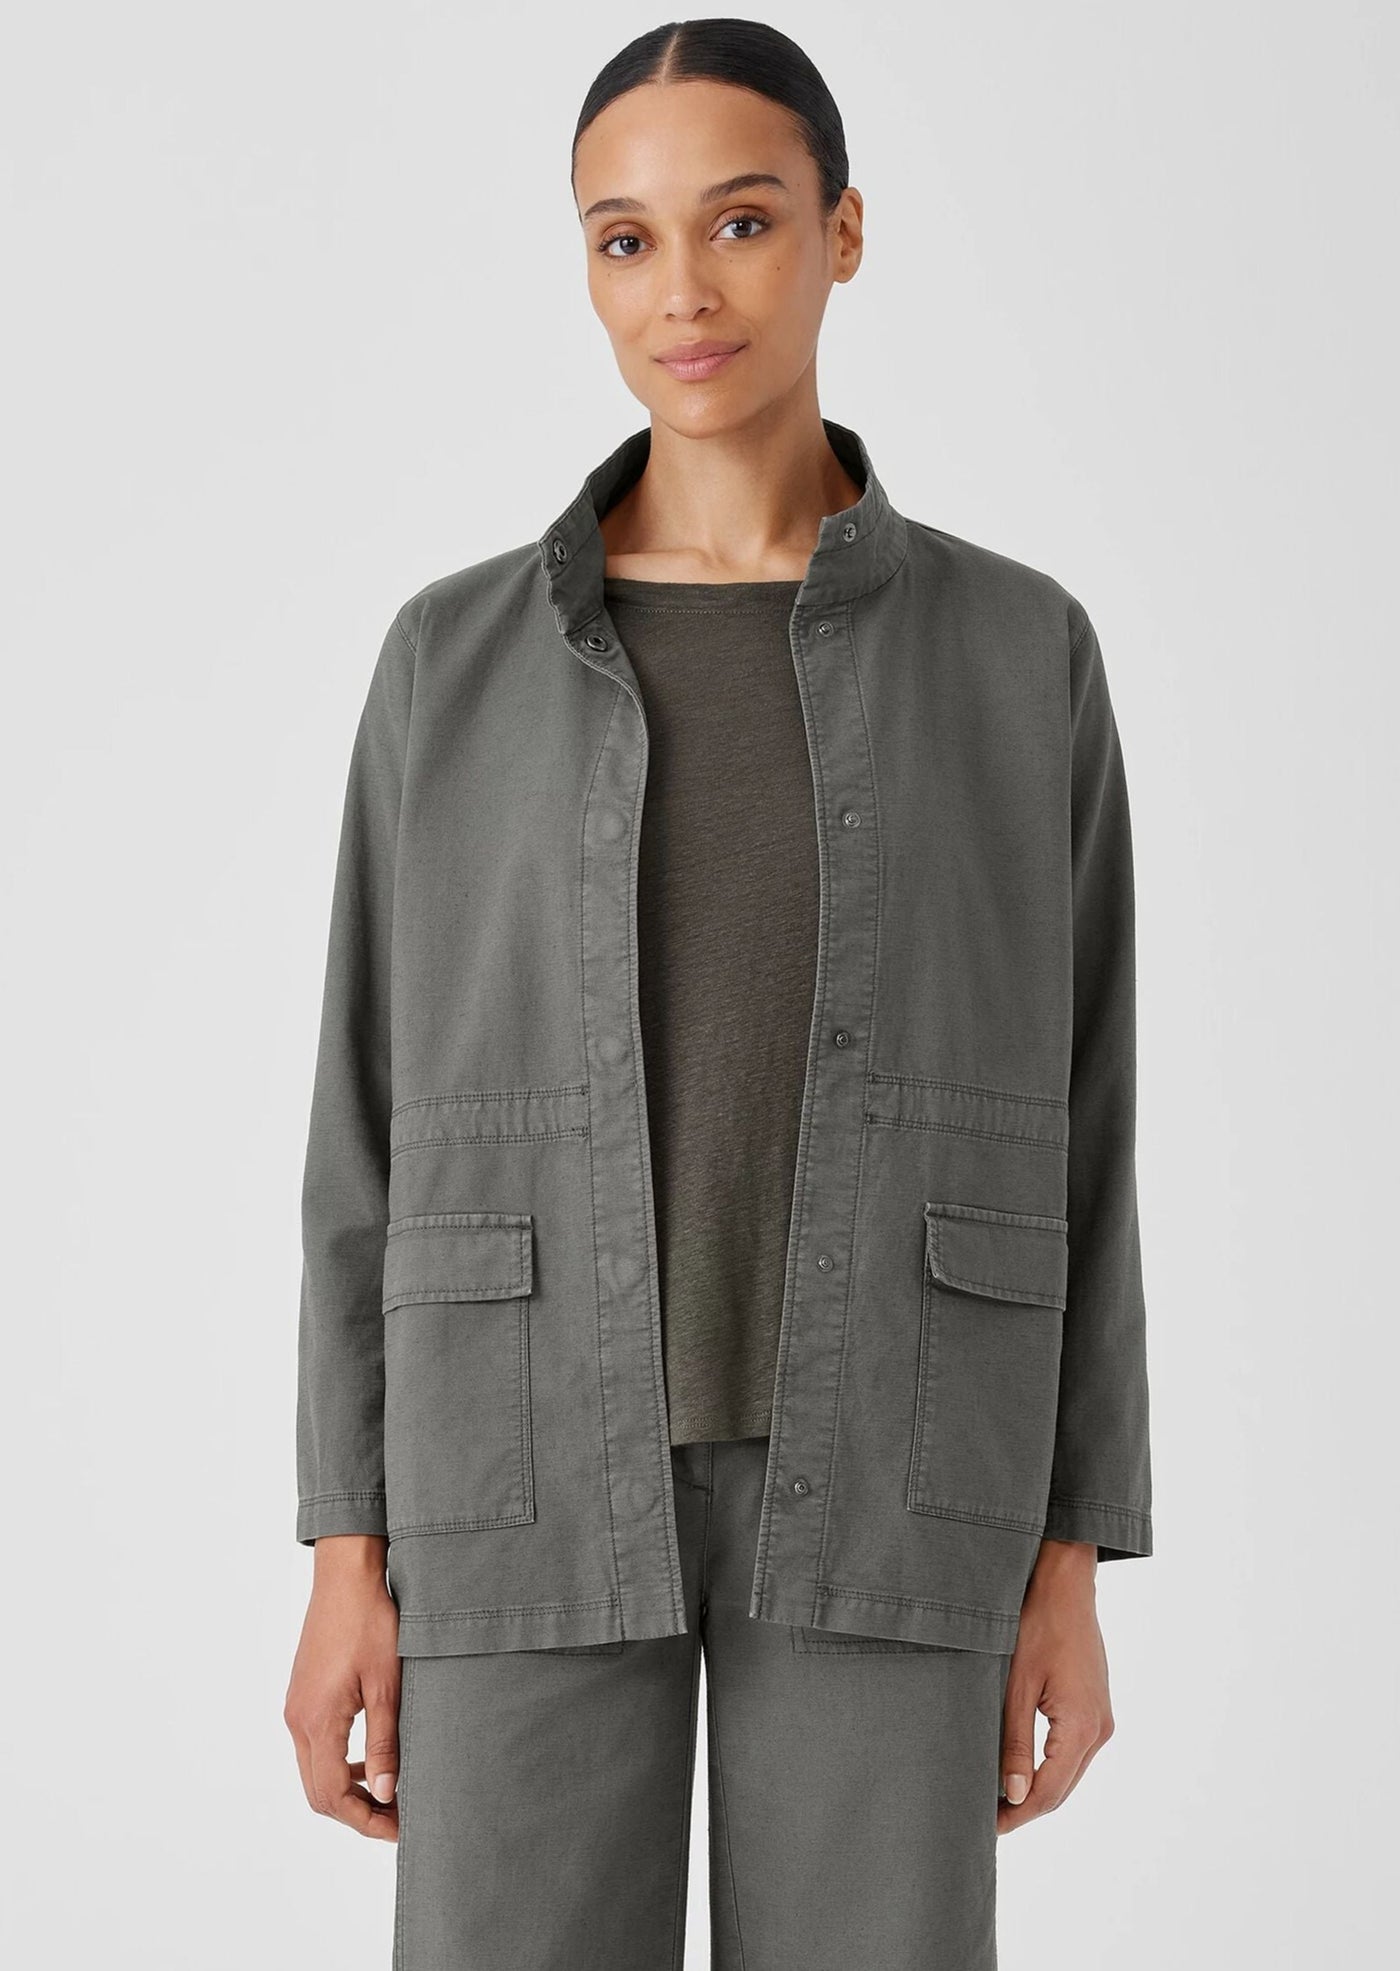 Eileen Fisher - Stand Collar Long Jacket